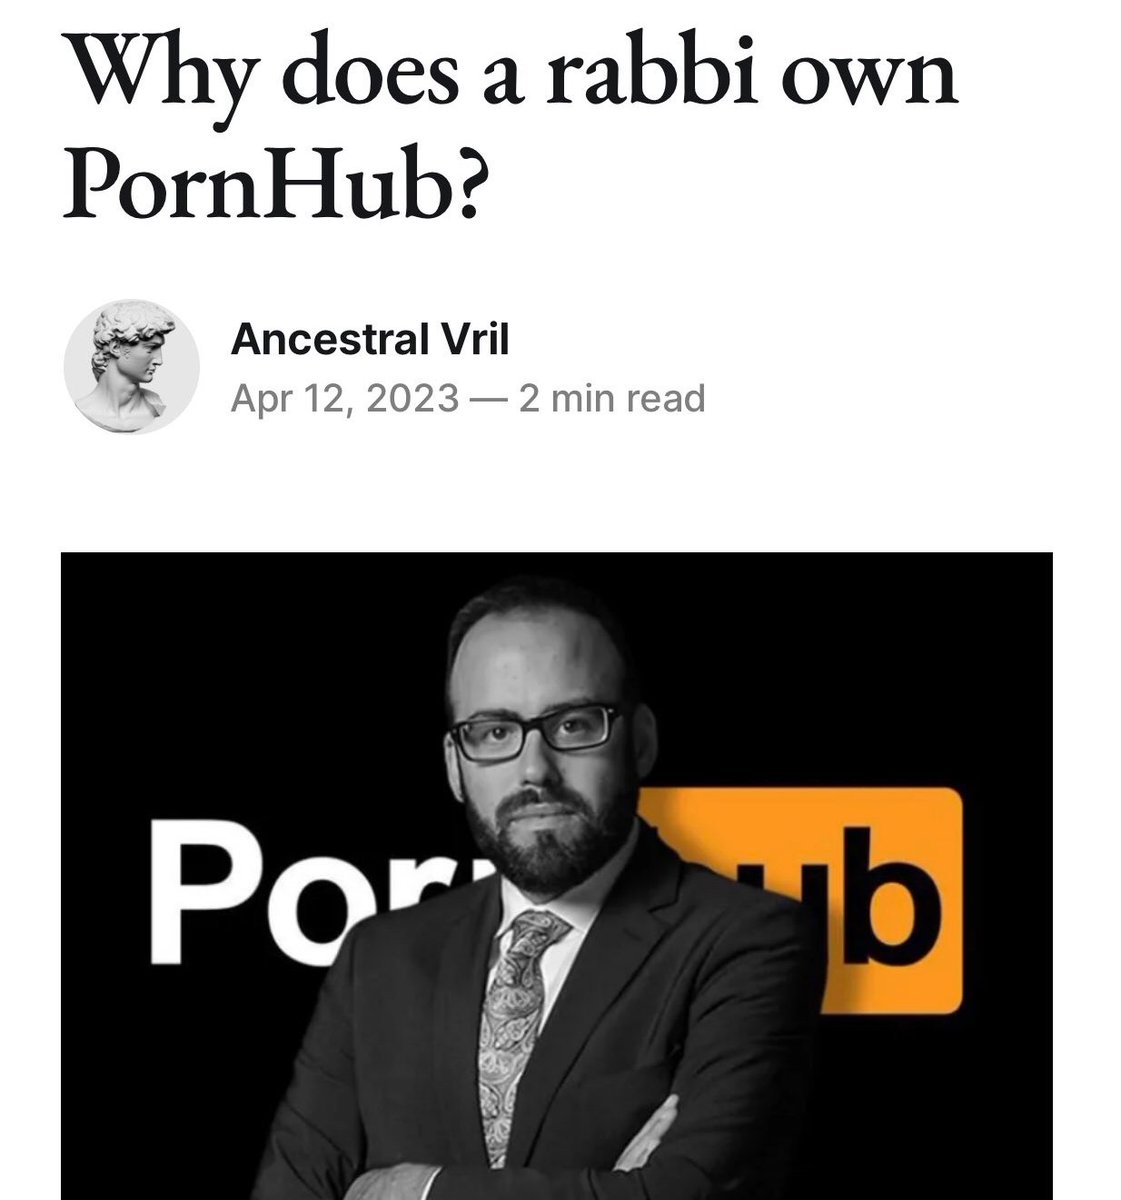 Let me know when you see a priest or an imam own a porn site. I'll wait.